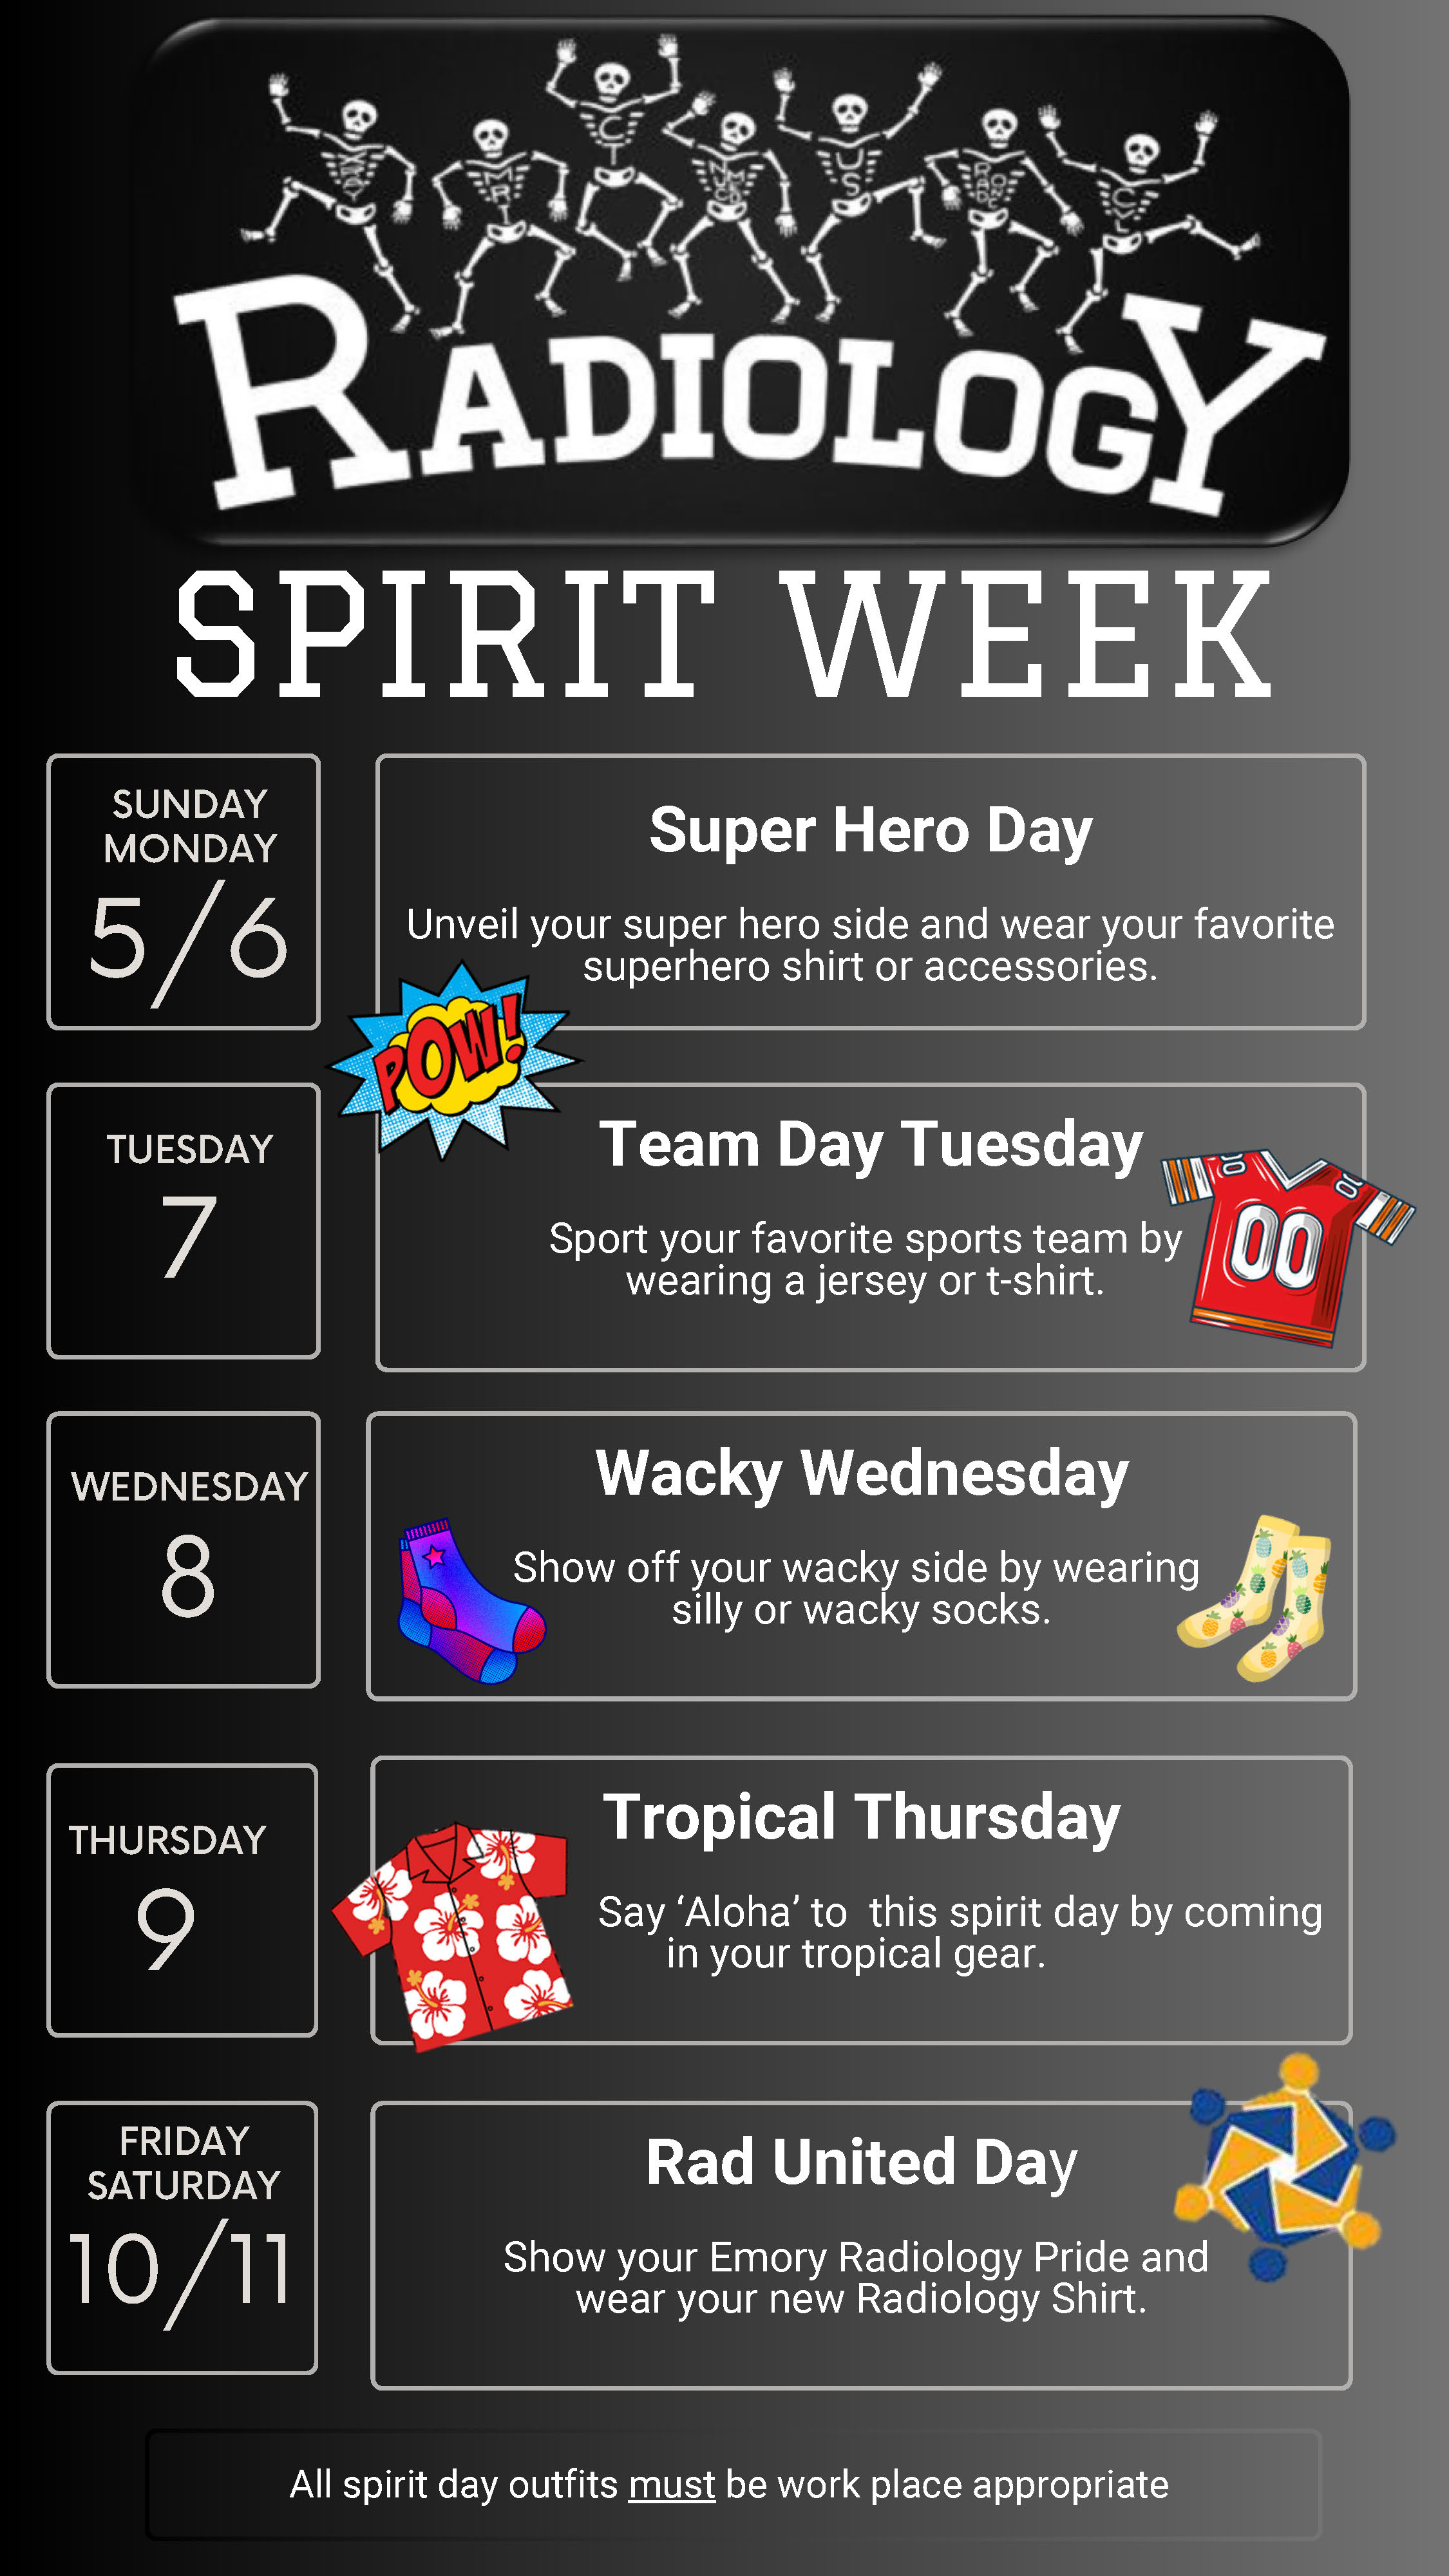 flyer listing the theme of each day of Radiology Spirit Week